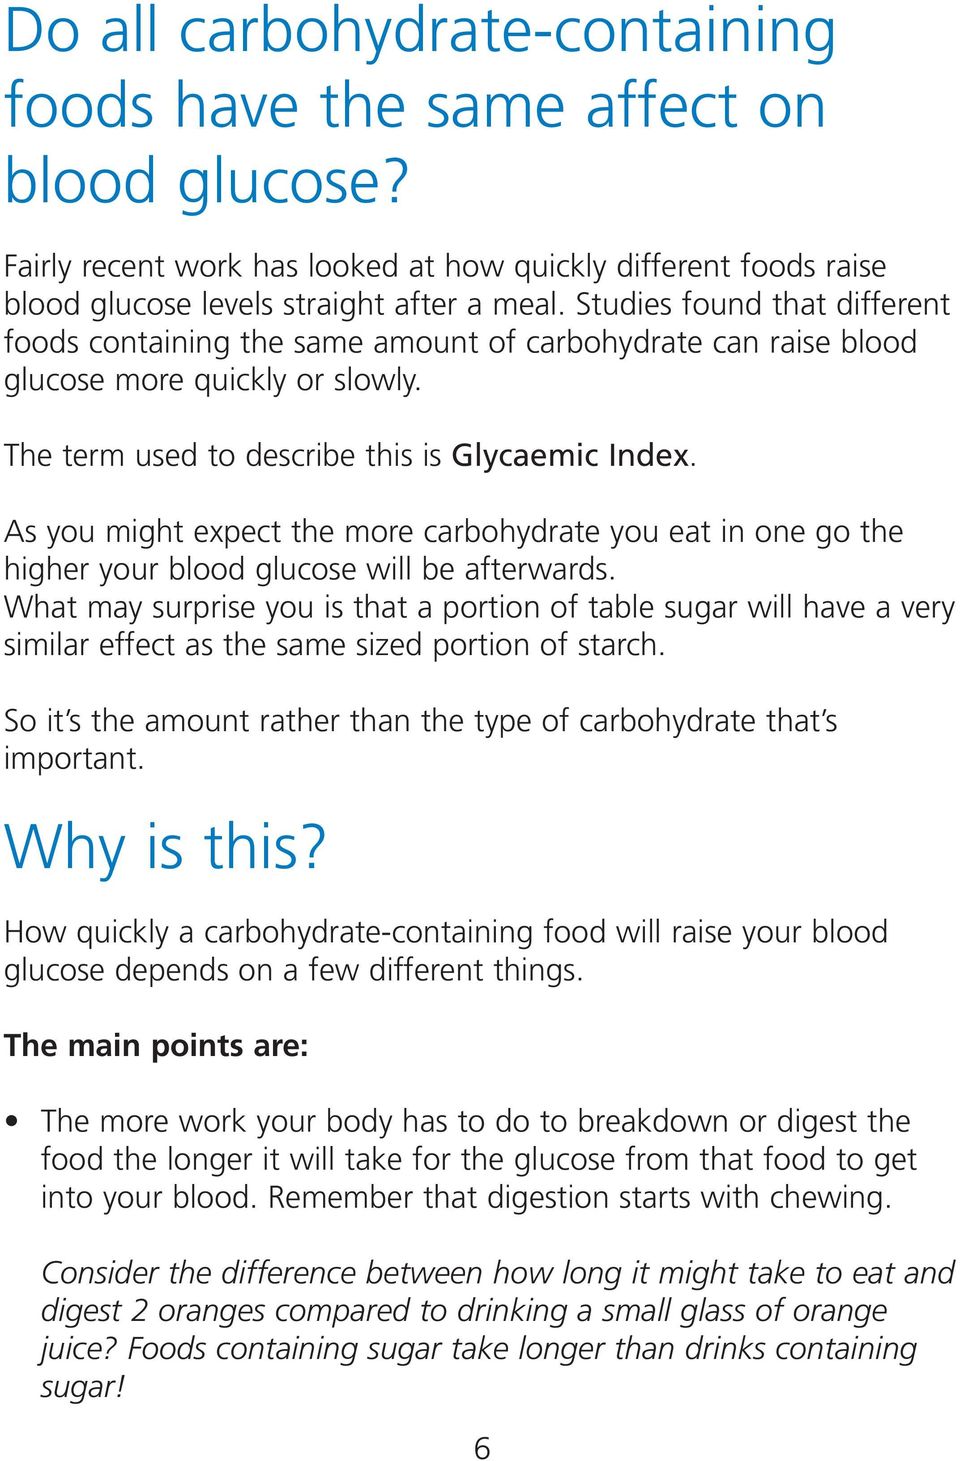 As you might expect the more carbohydrate you eat in one go the higher your blood glucose will be afterwards.